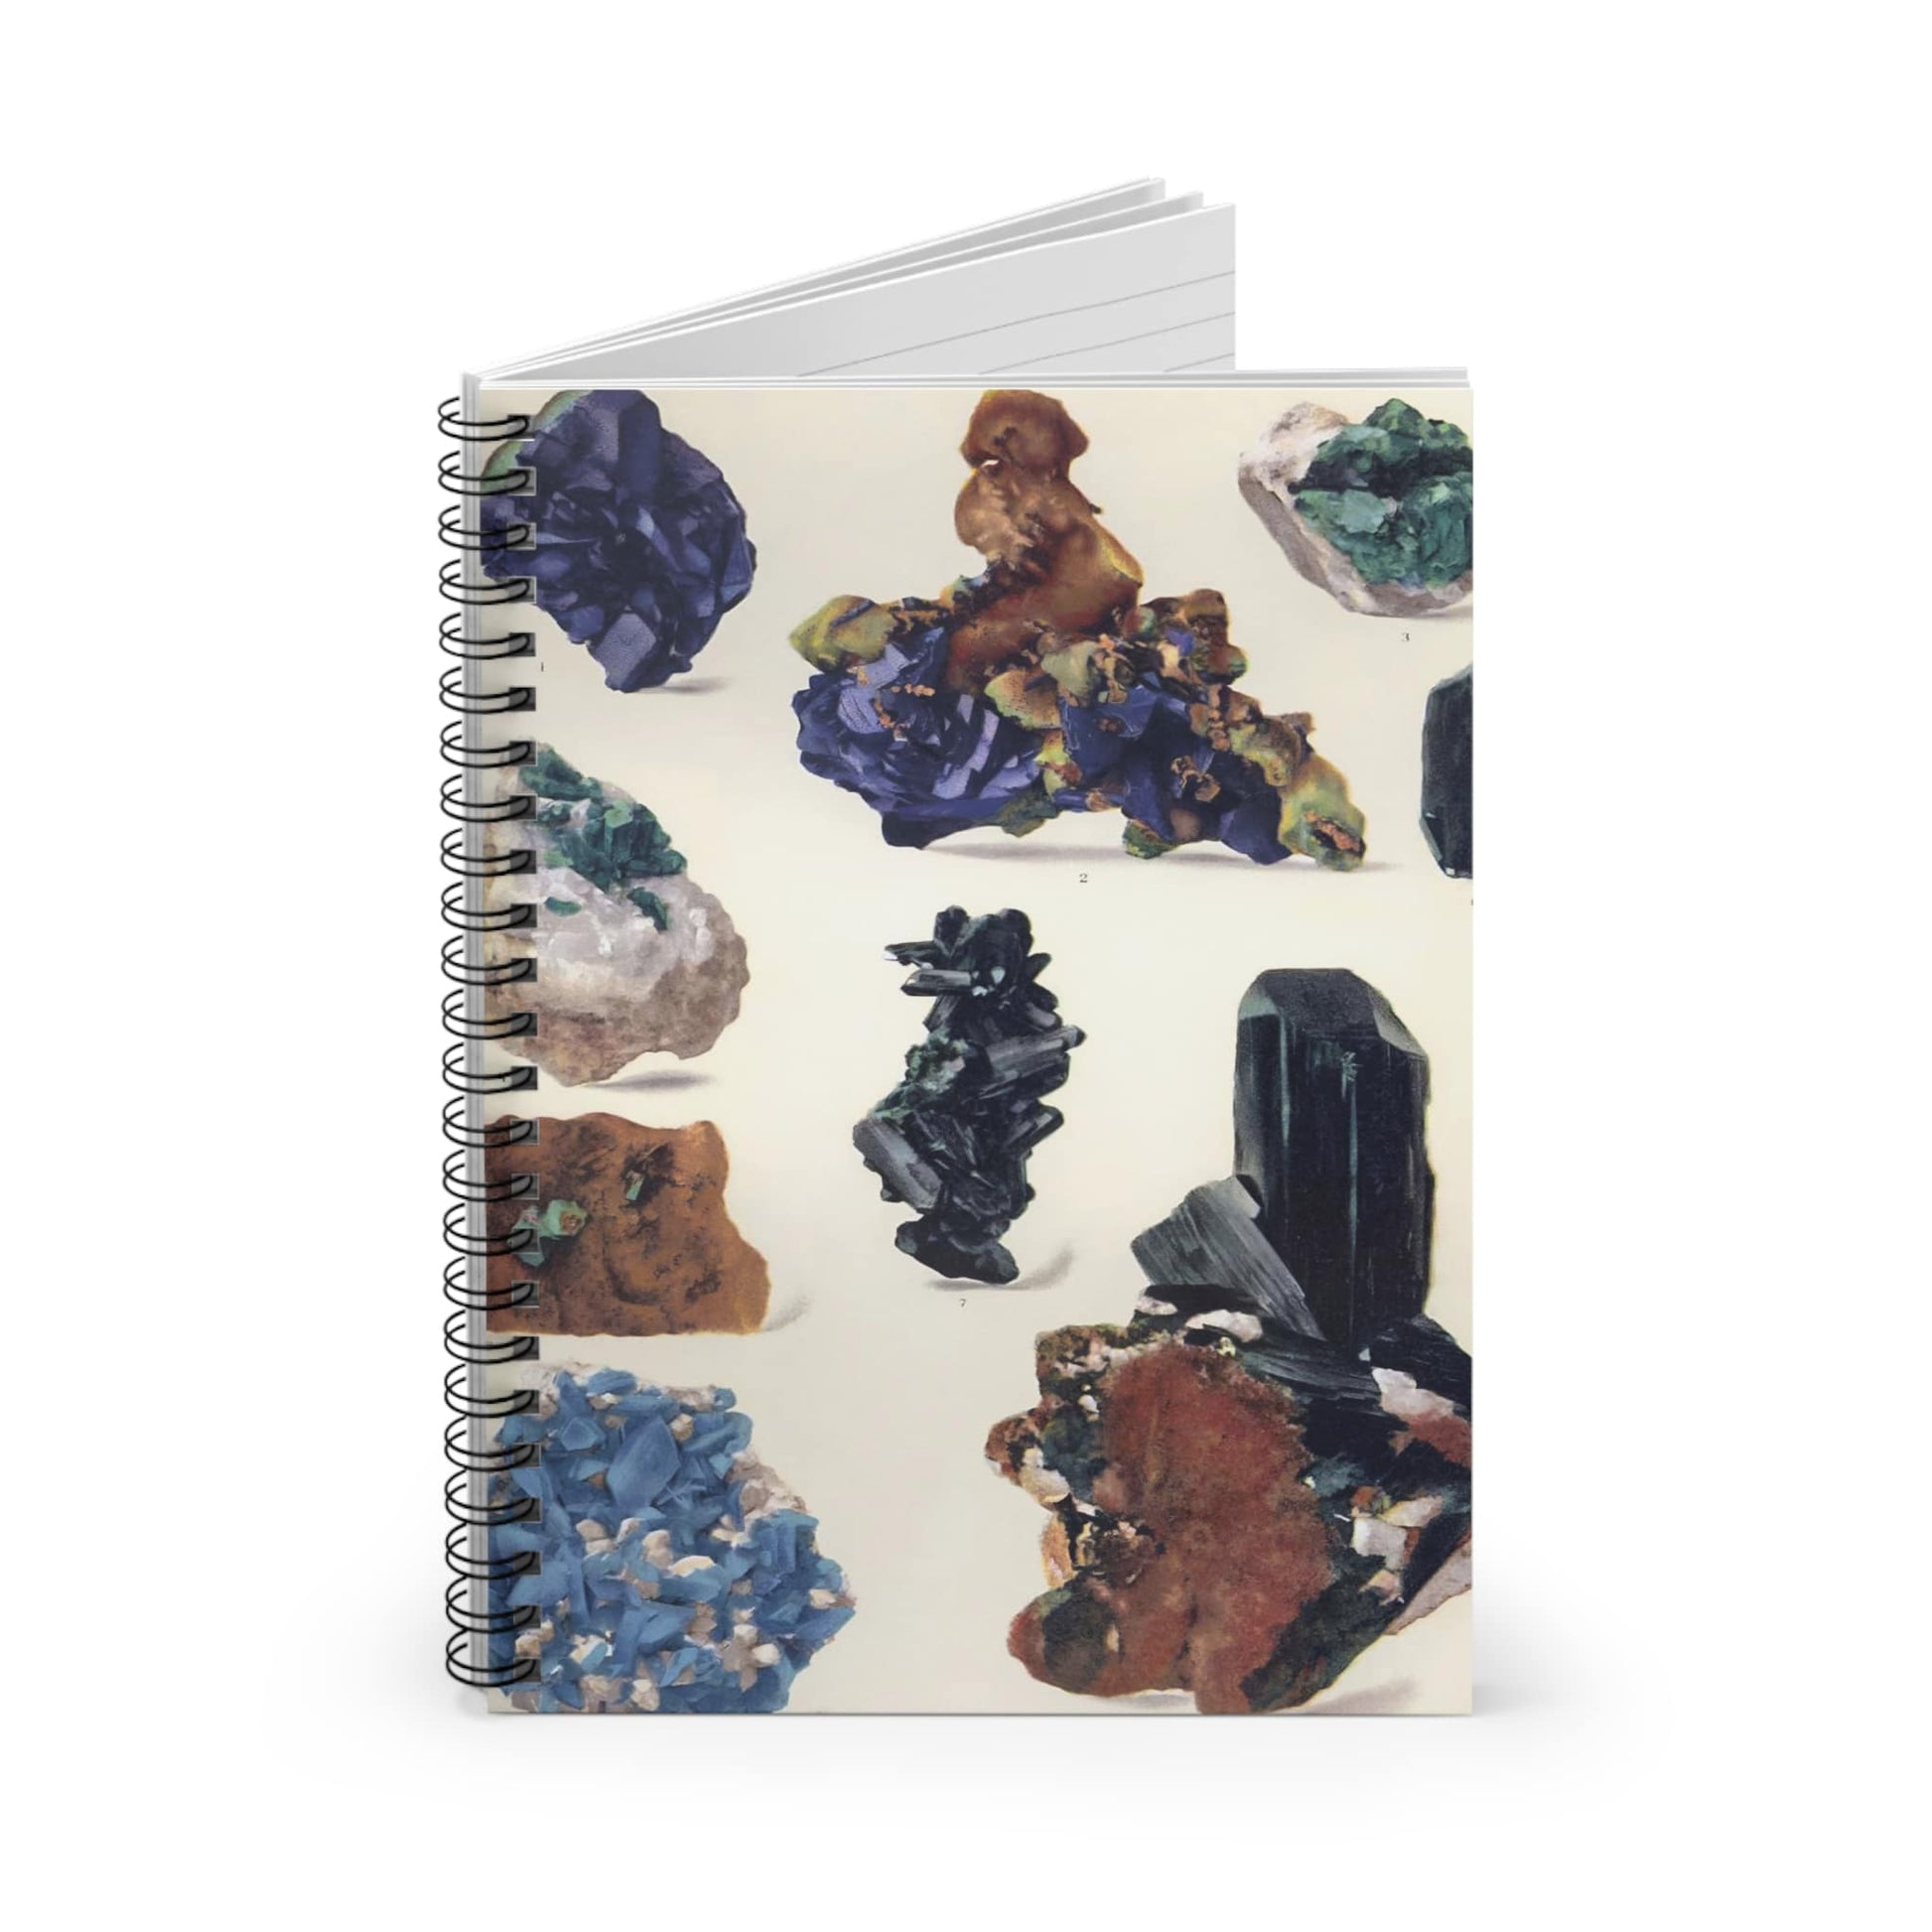 Colorful Gemstone Spiral Notebook Standing up on White Desk